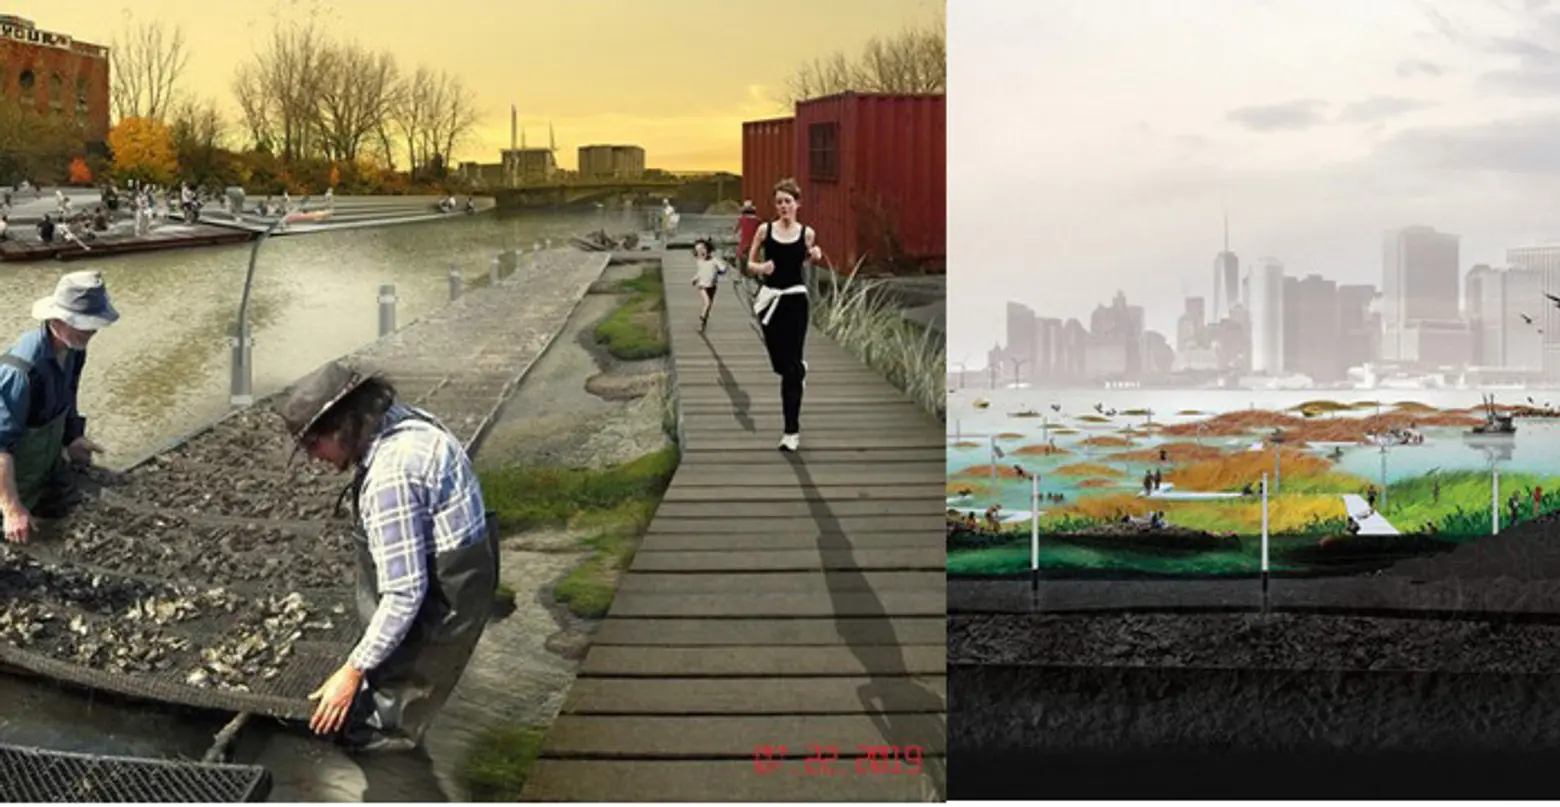 Living Breakwaters, SCAPE, Kate Orff, Oysters, Tottenville, Rebuild by Design, Staten Island, Ecology,